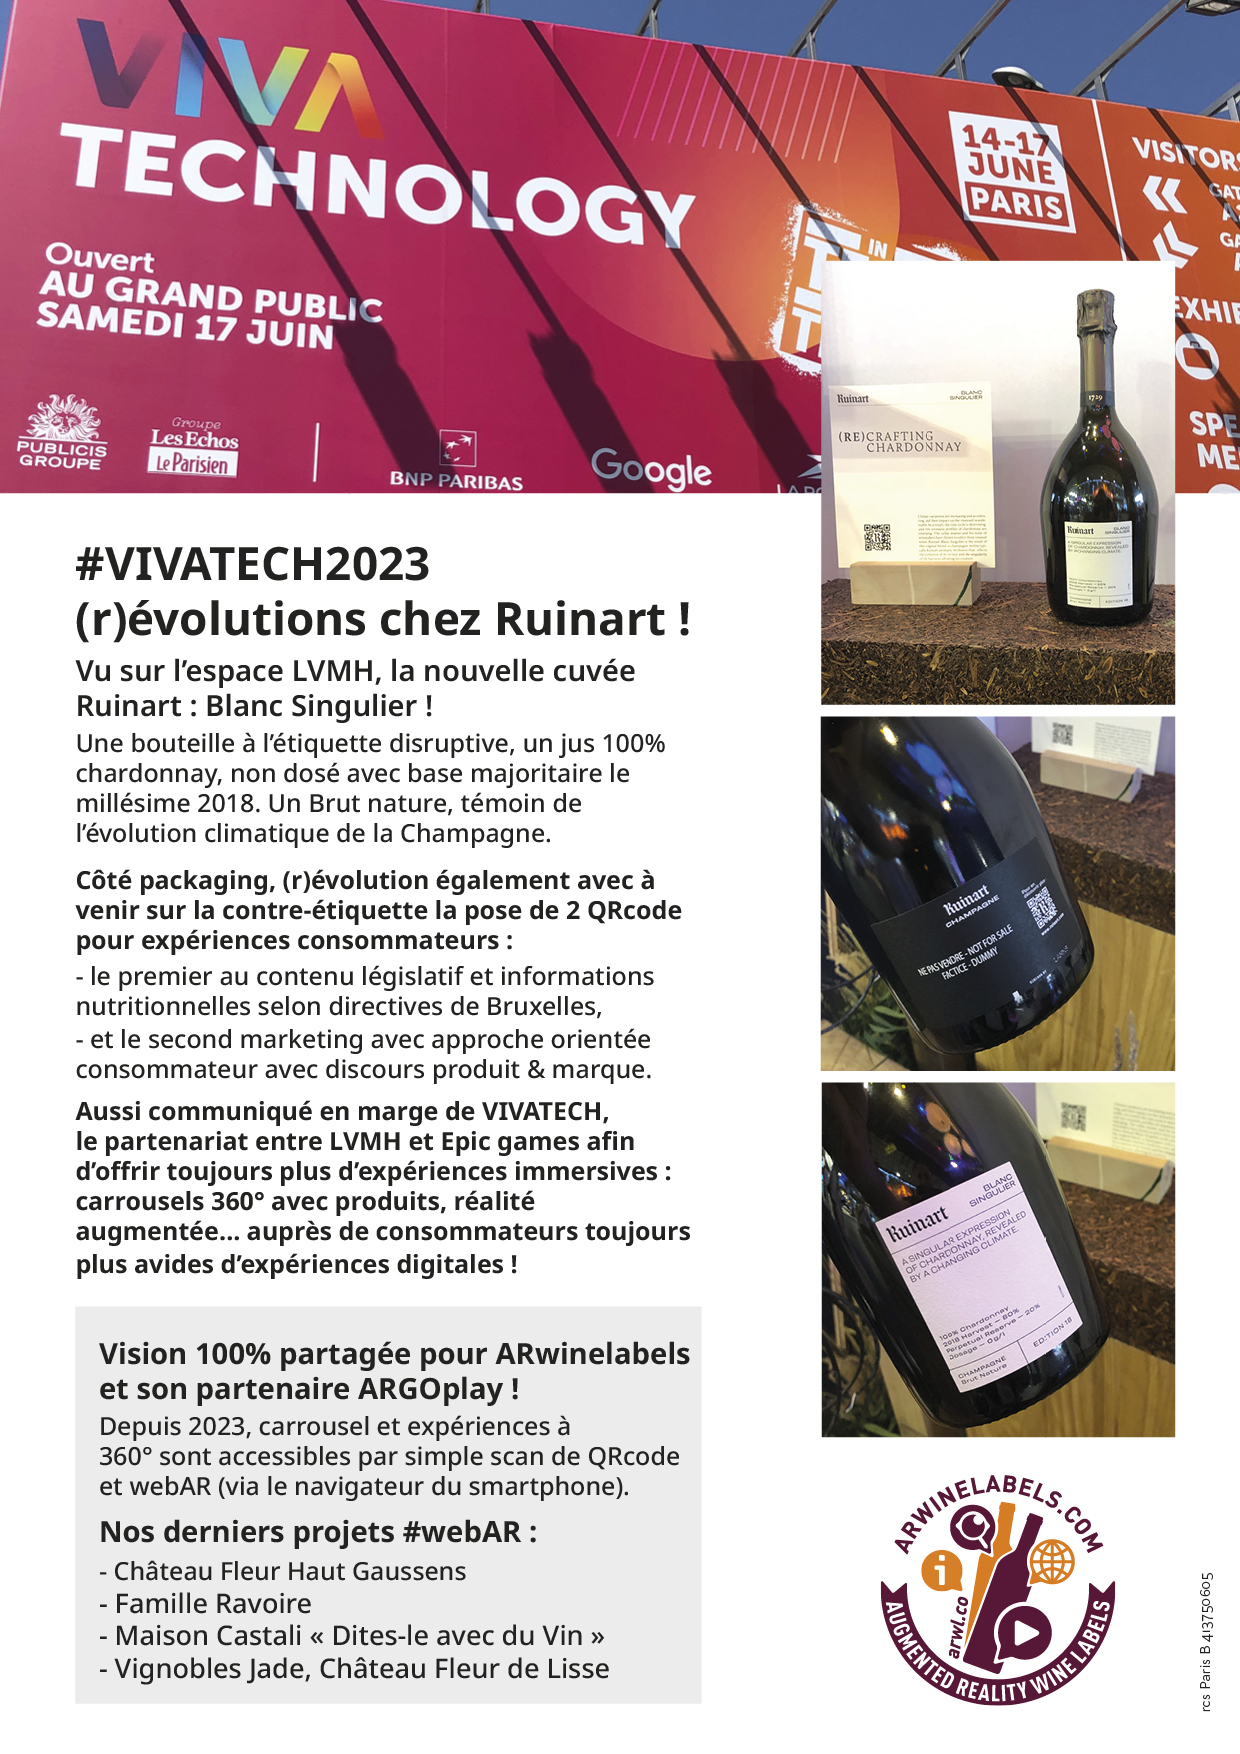 ARwinelabels and Vivatech 2023 QR code Marketing and Augmented Reality